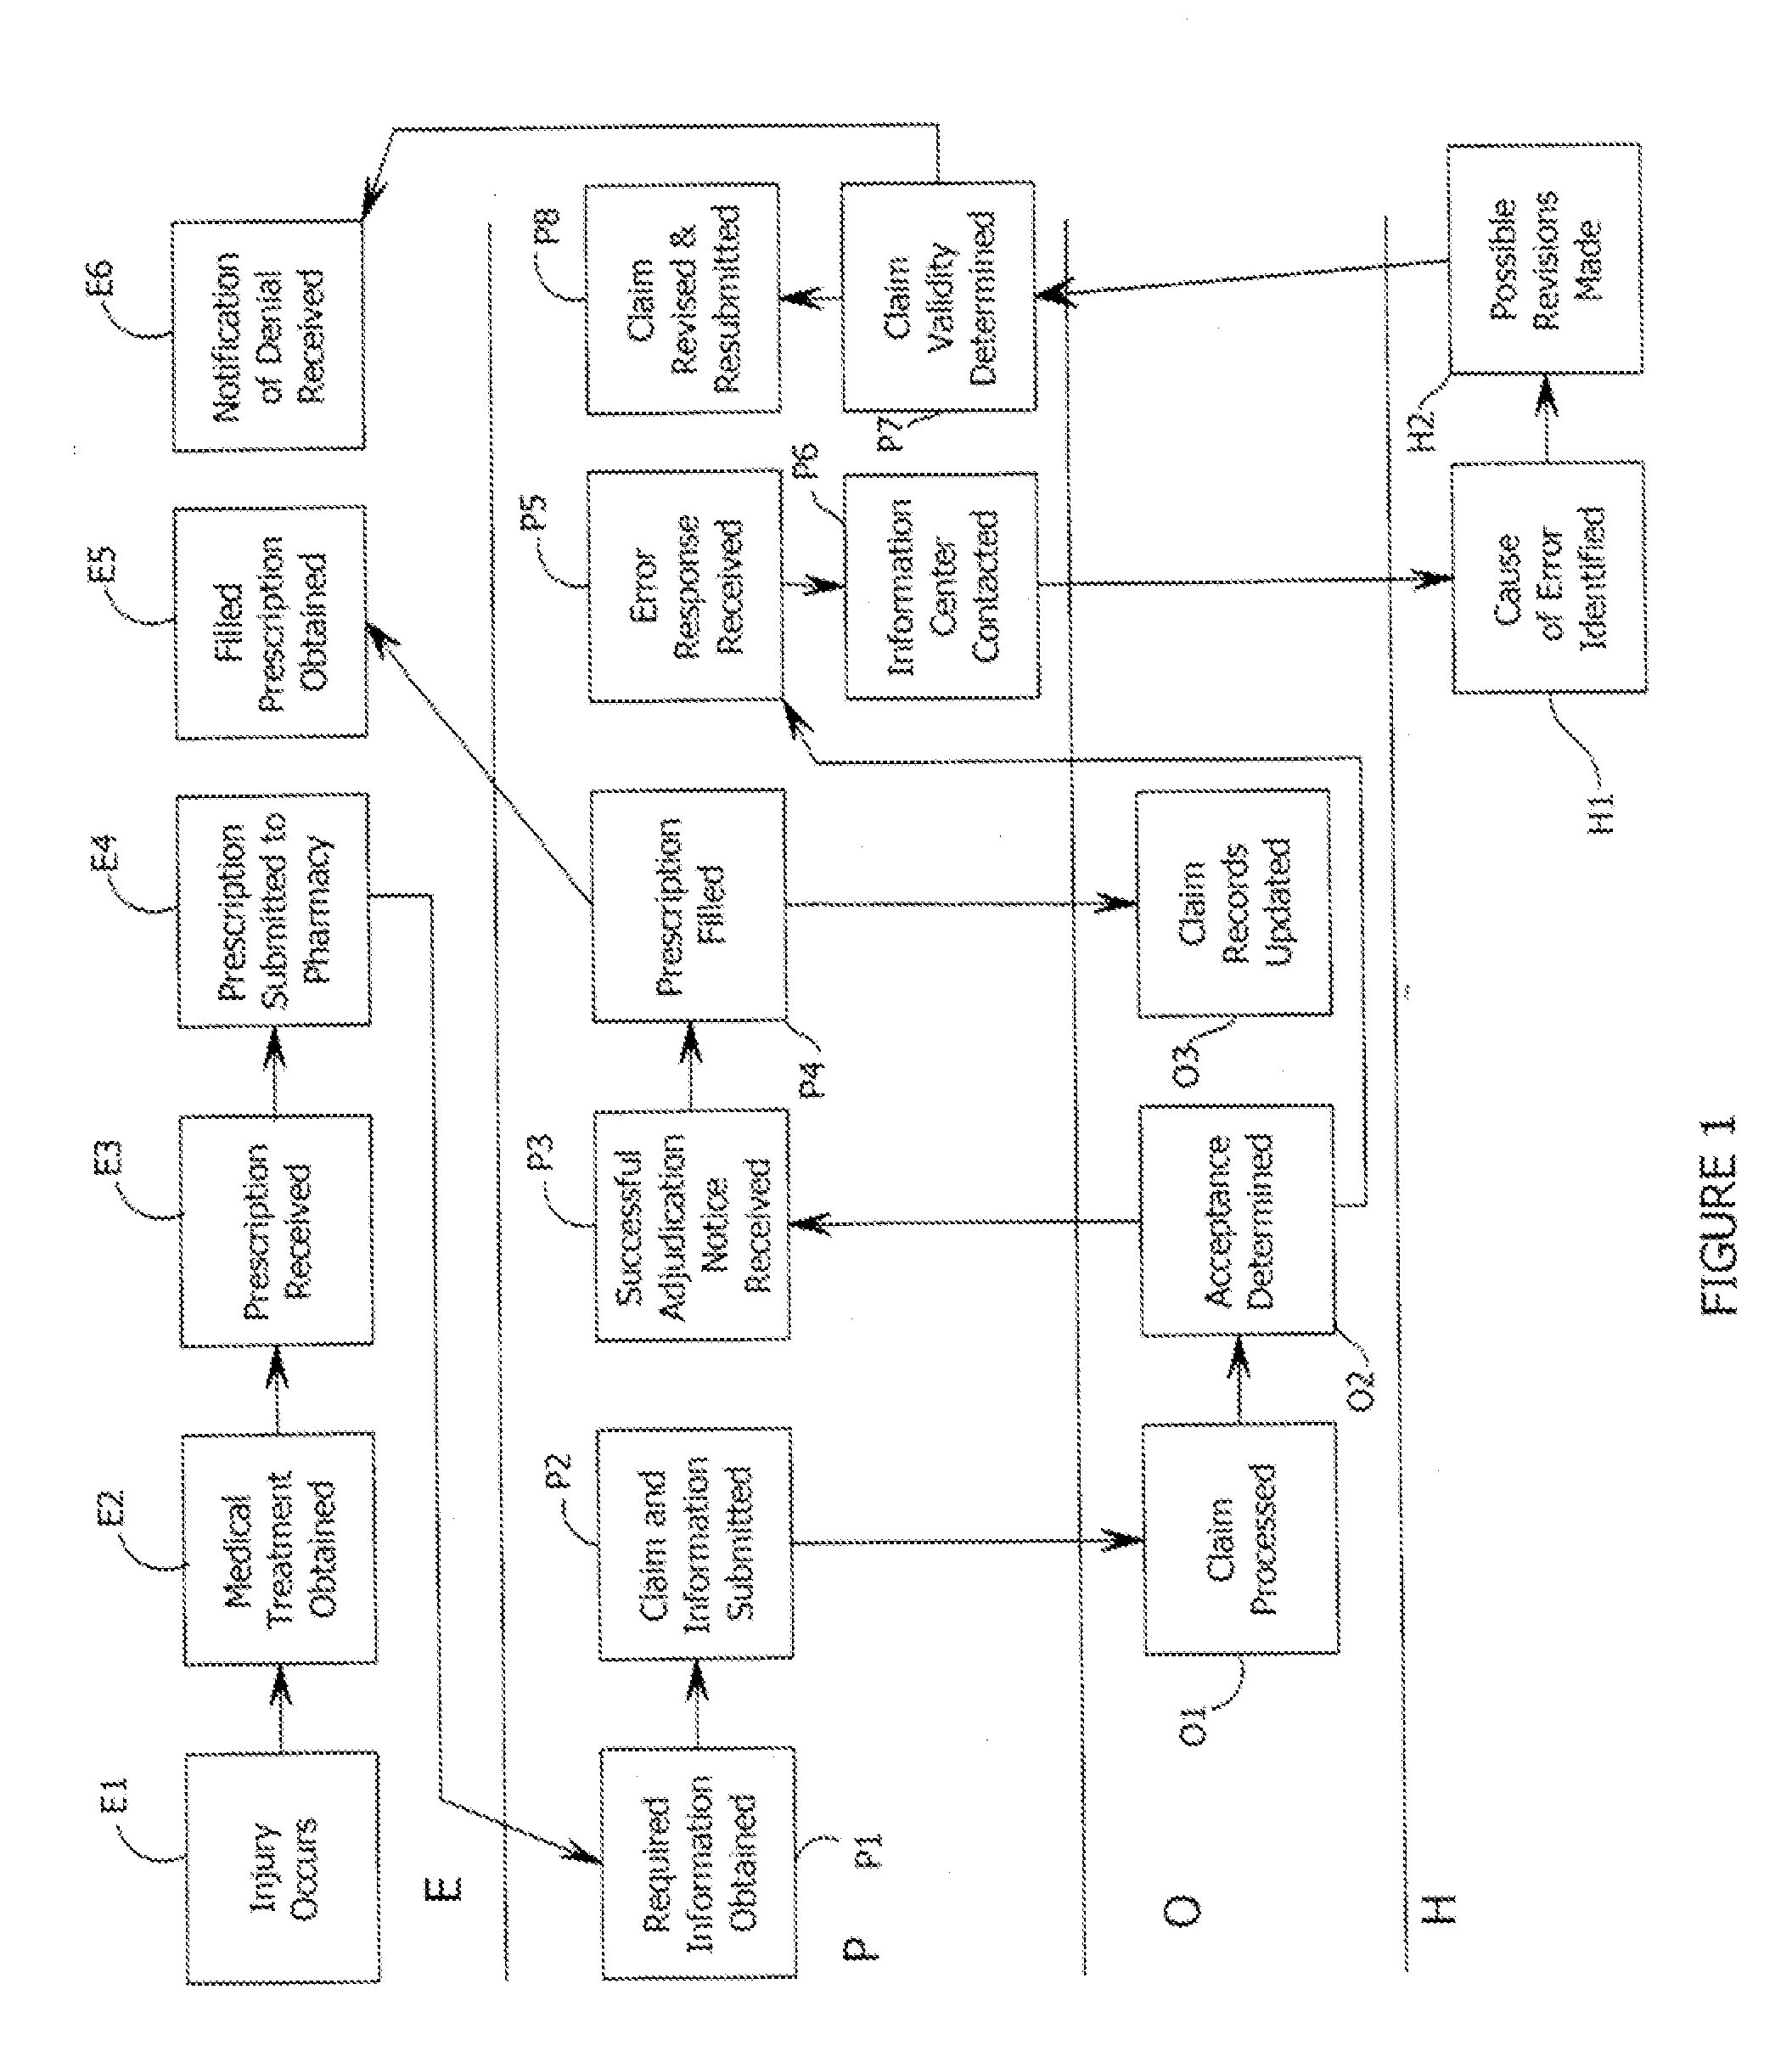 Systems and methods for accelerated payment of pharmacy prescription claims